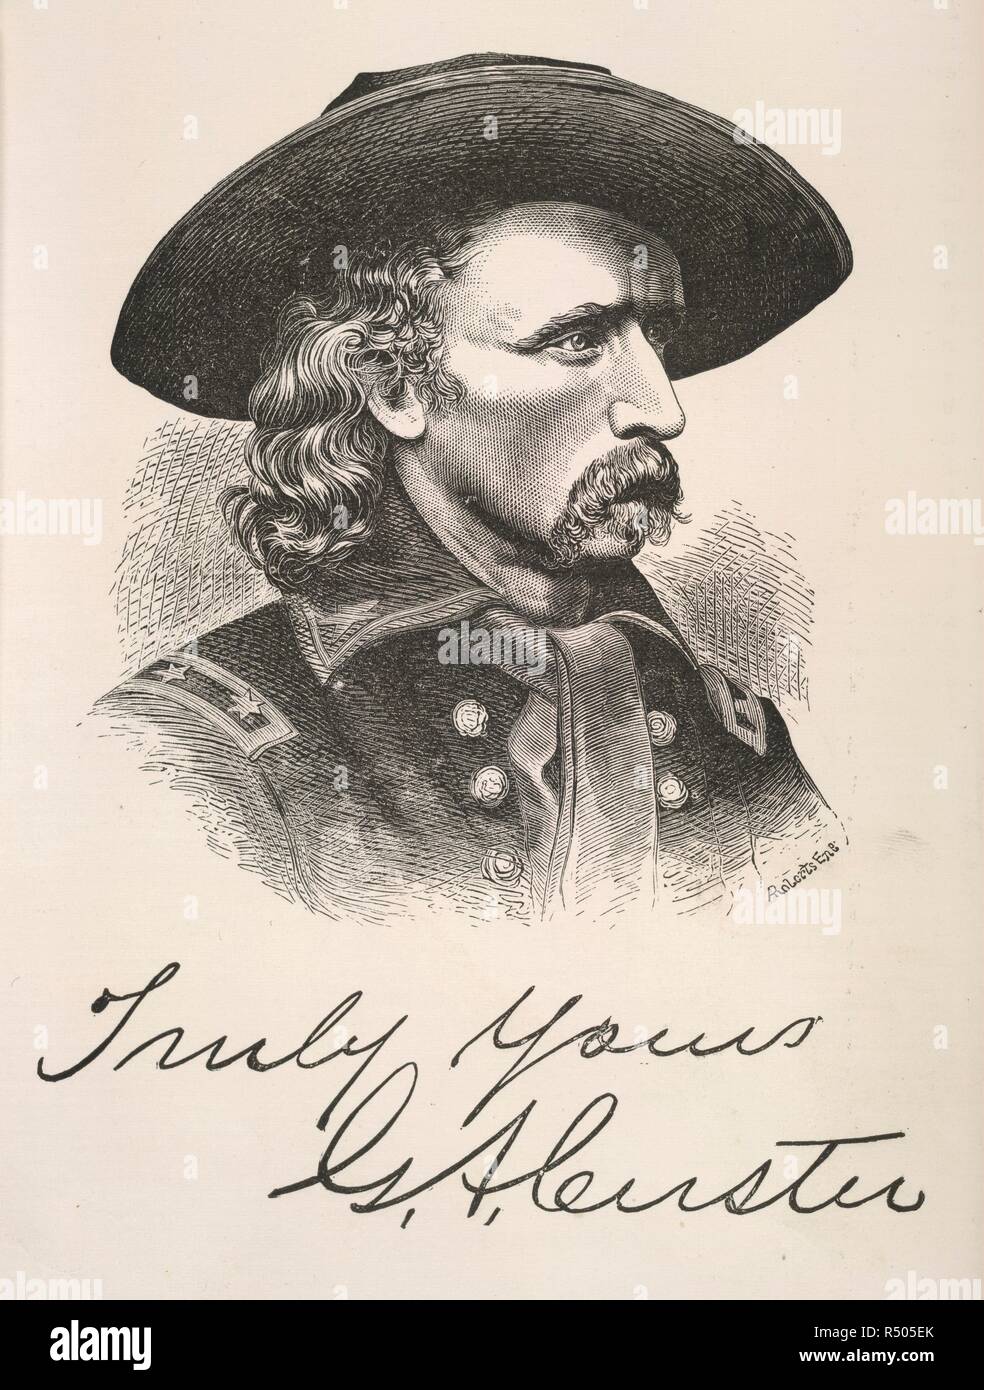 George Armstrong Custer. My Life on the Plains. Or, Personal experiences wi. Sheldon & Co.: New York, [1895.]. George Armstrong Custer (1839-76). American soldier. Commander of the 7th Cavalry at the Battle of the Little Big Horn, where he and 260 soldiers were surrounded and killed. The event became known as 'Custer's Last Stand'.  Image taken from My Life on the Plains. Or, Personal experiences with Indians. [With plates, including a portrait.].  Originally published/produced in Sheldon & Co.: New York, [1895.]. . Source: 10412.ee.5, opposite 5. Language: English. Stock Photo